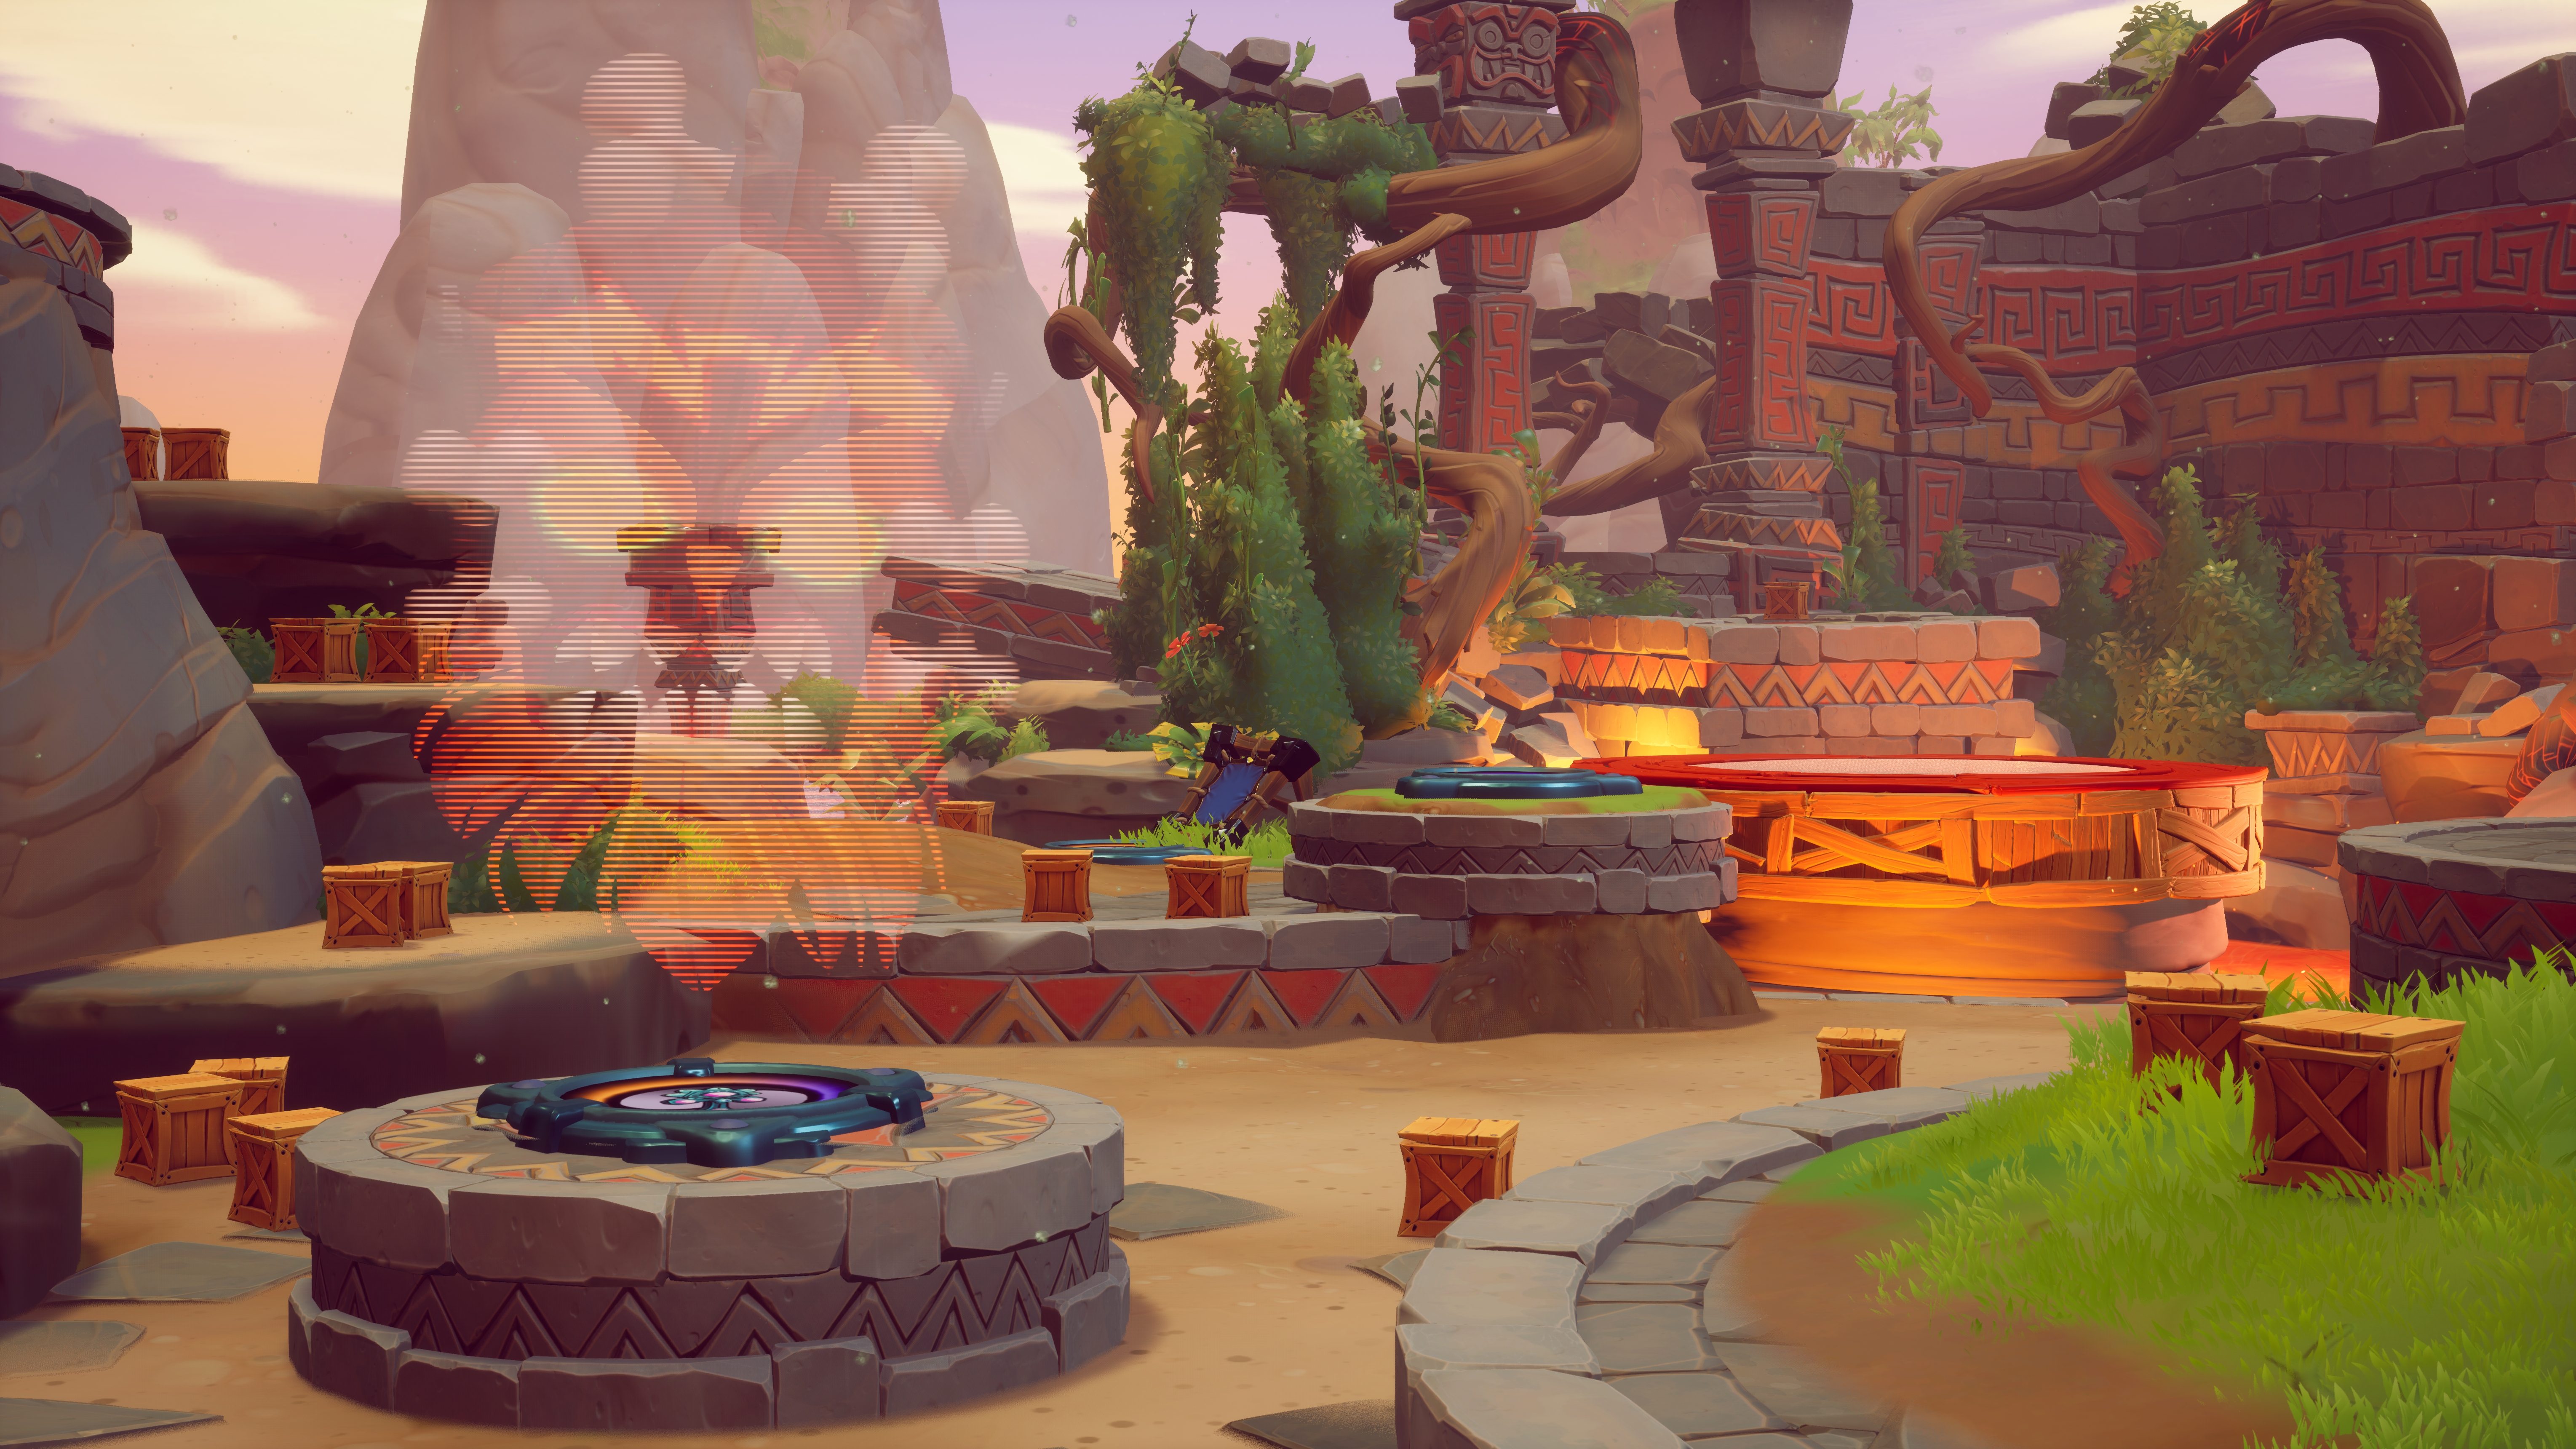 Crash Team Rumble Season 2 adds new 4-player co-op modes